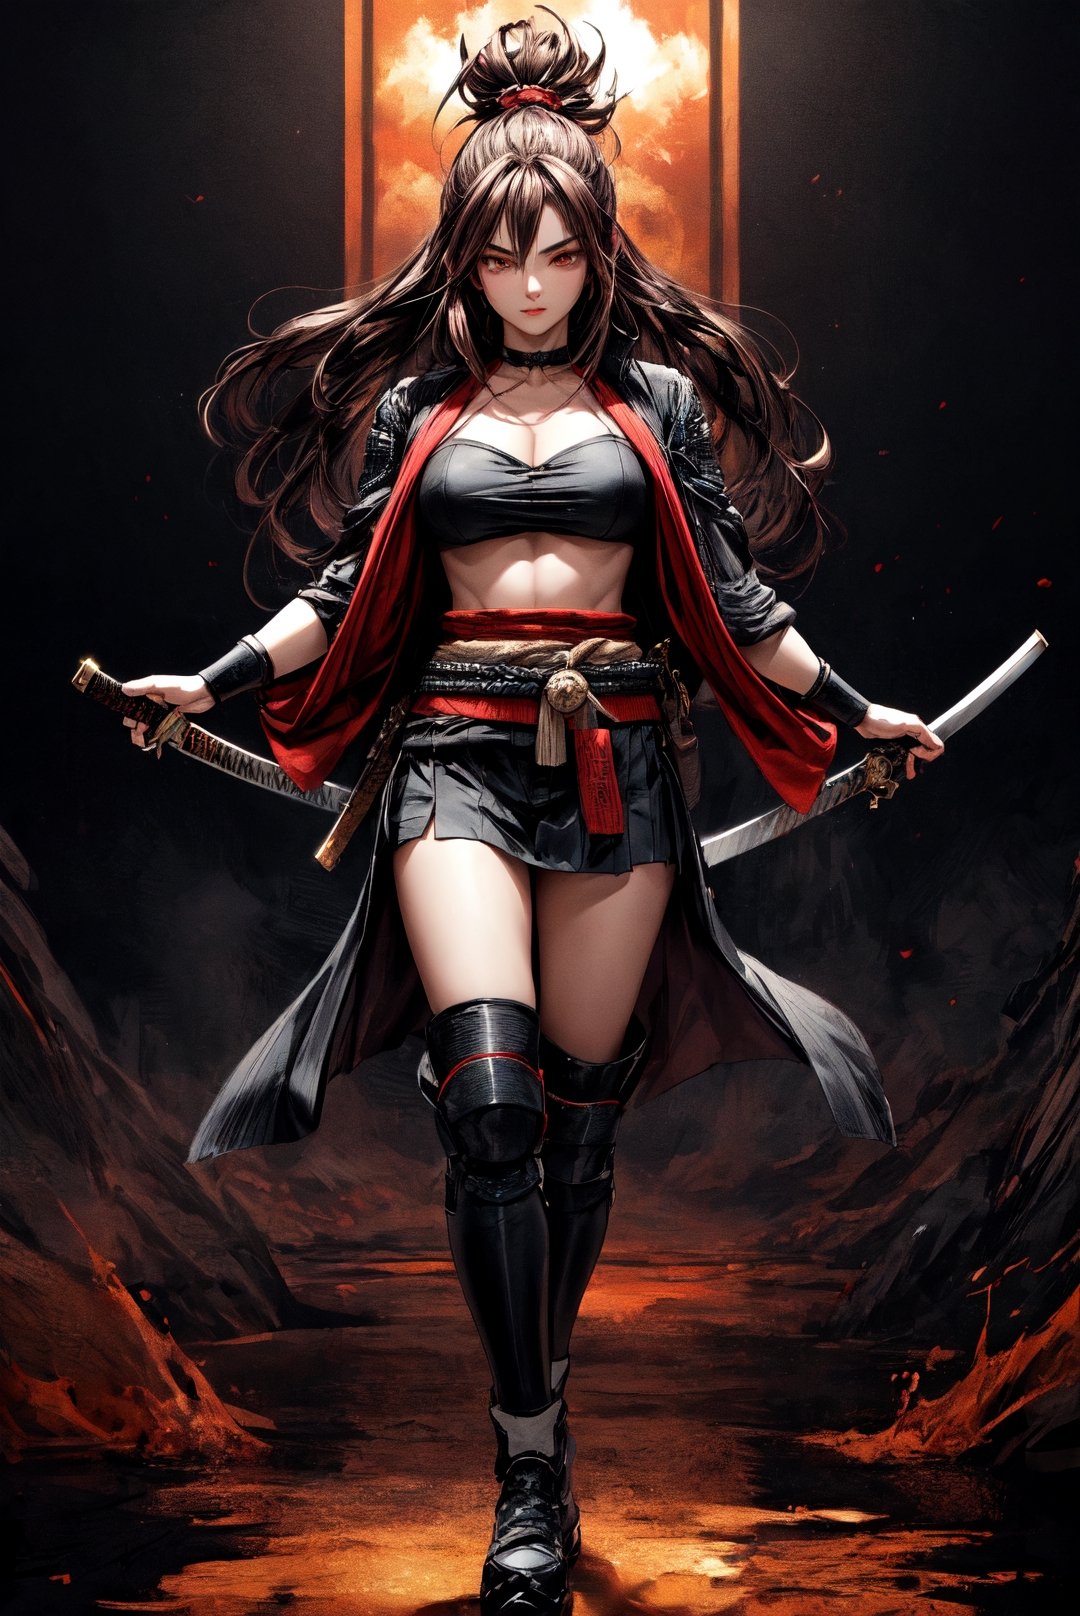 {[(8K quality image), (full body), (ultra quality image), (ultra detailed image), (perfect body), (super detailed)]}, 
Woman samurai, long black hair, reddish brown eyes, defined body, combat stance, serious face, psychedelic setting, sexy woman, xogun age